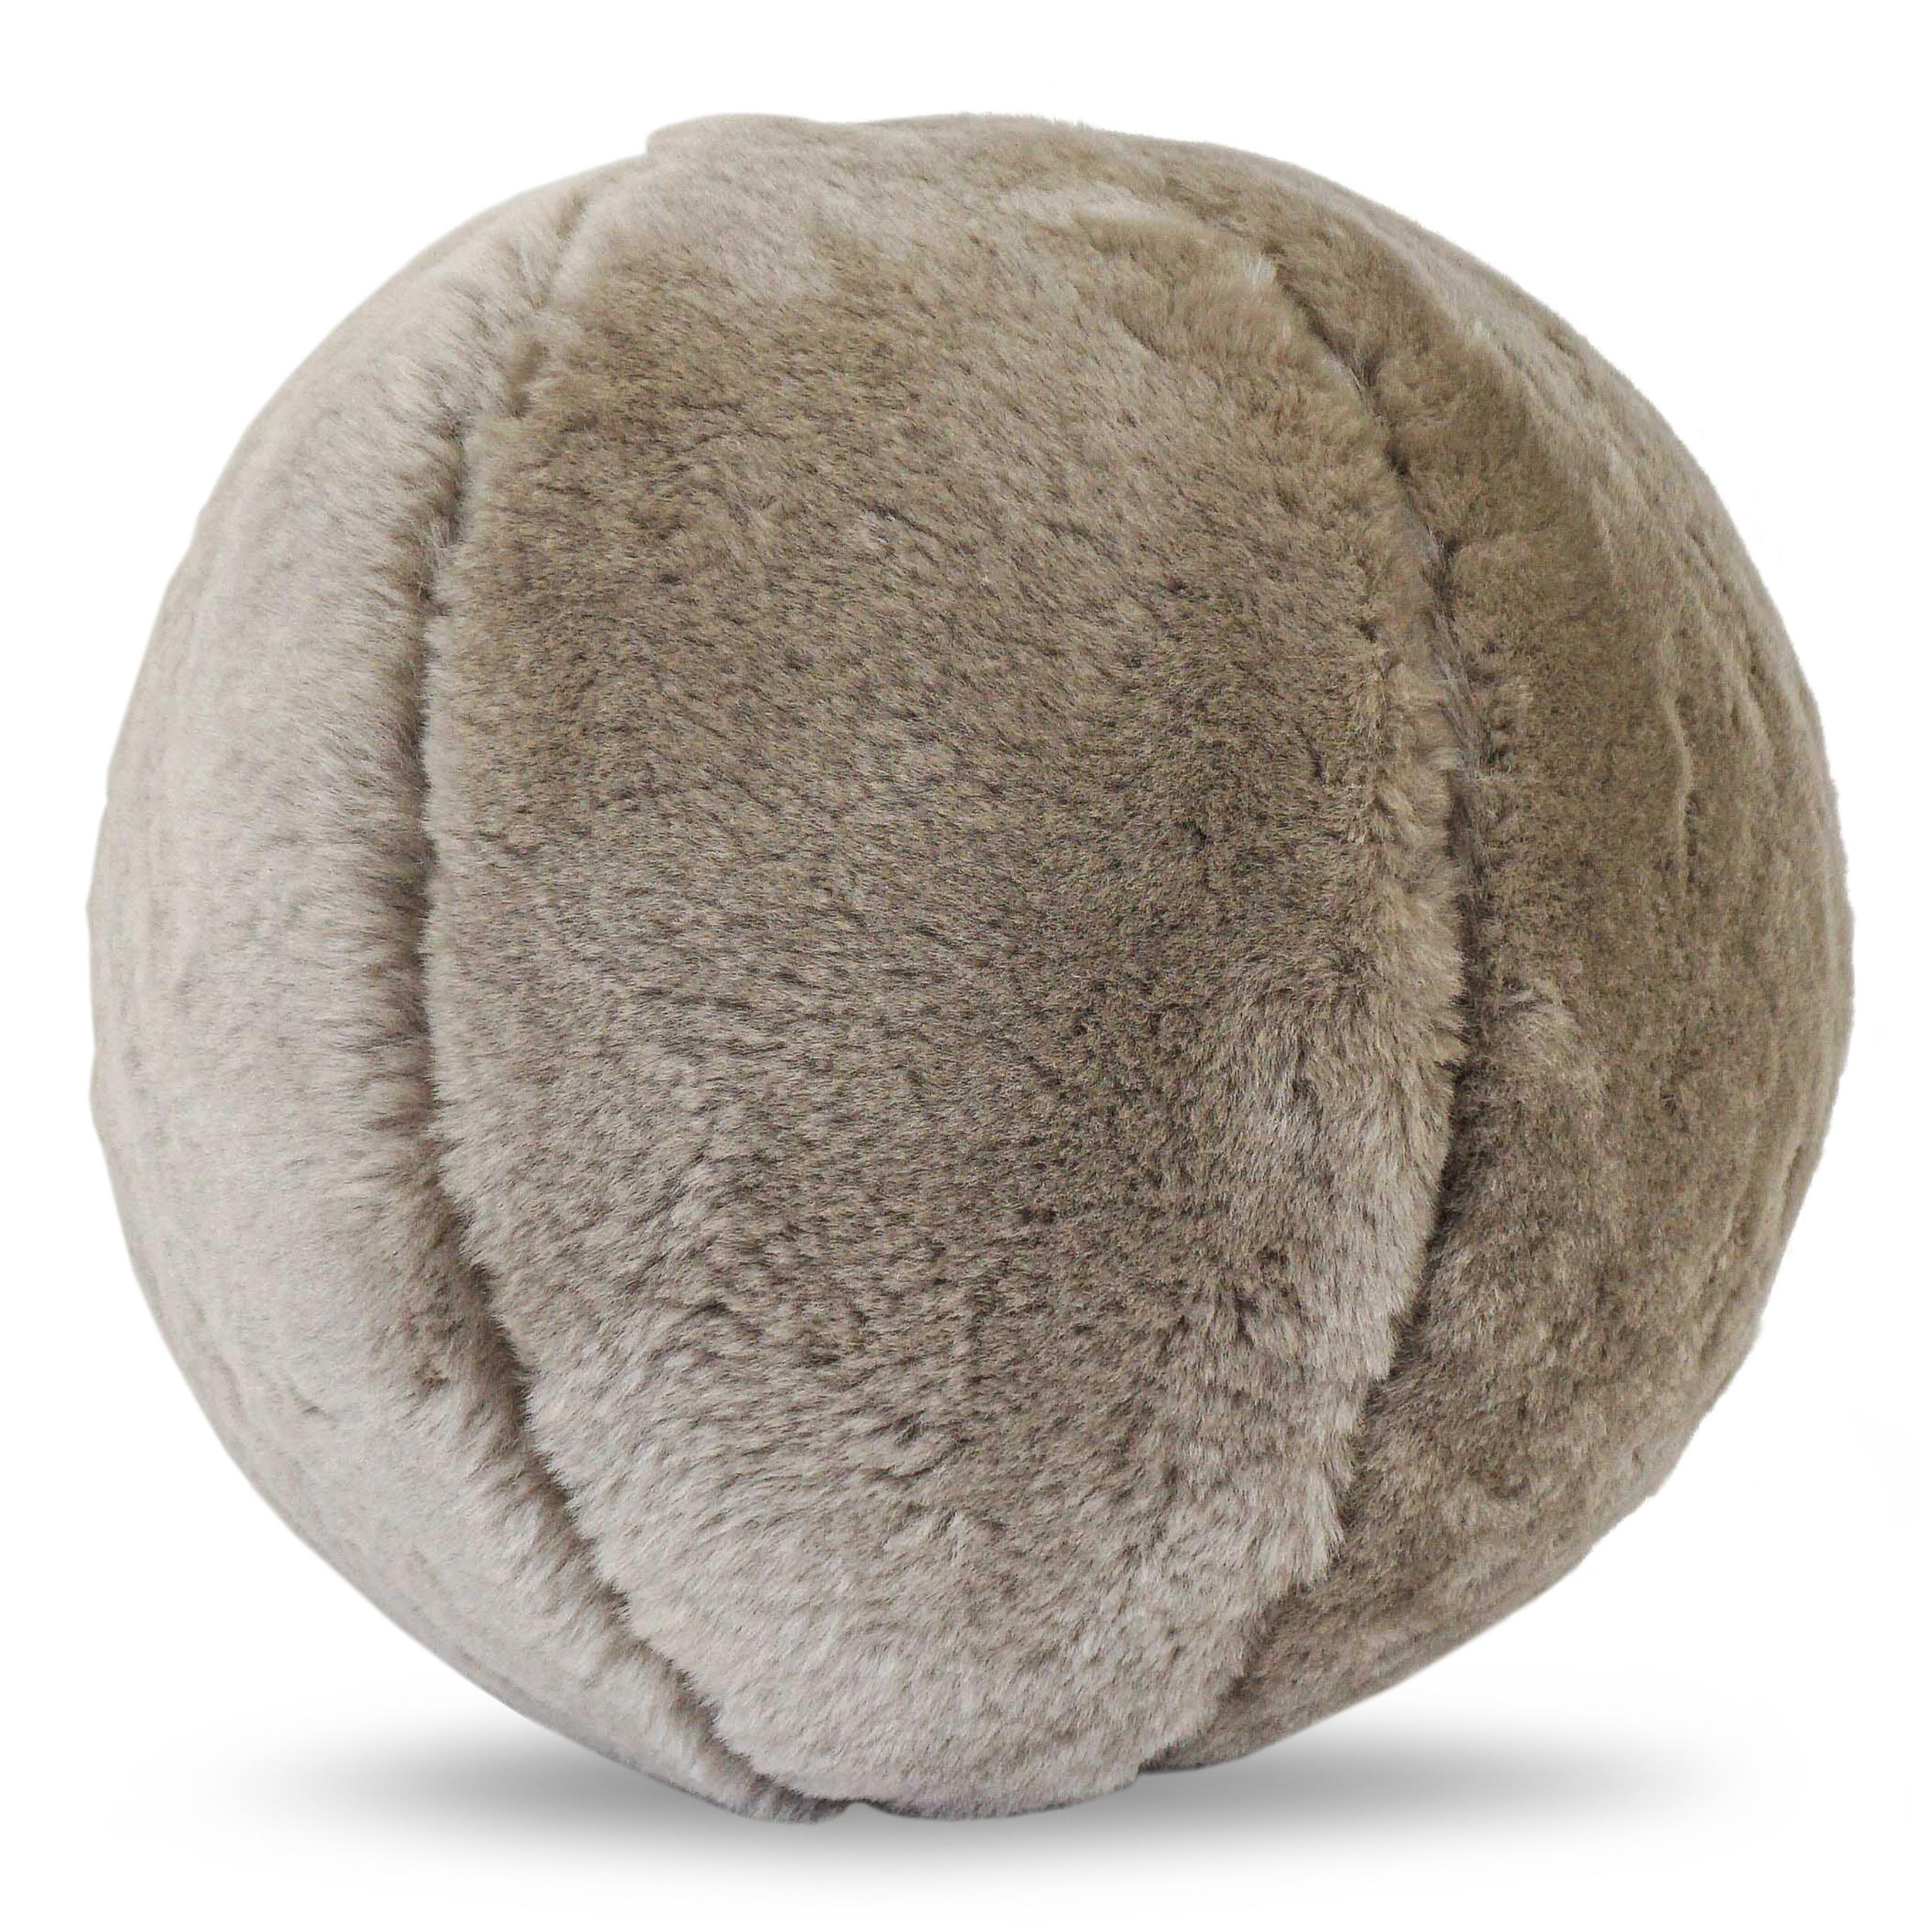 Firm polyfill stuffed ball pillow covered in a cozy gray shearling hide. Can be customized in size and fabric. 

Measurements:
Outside: 13